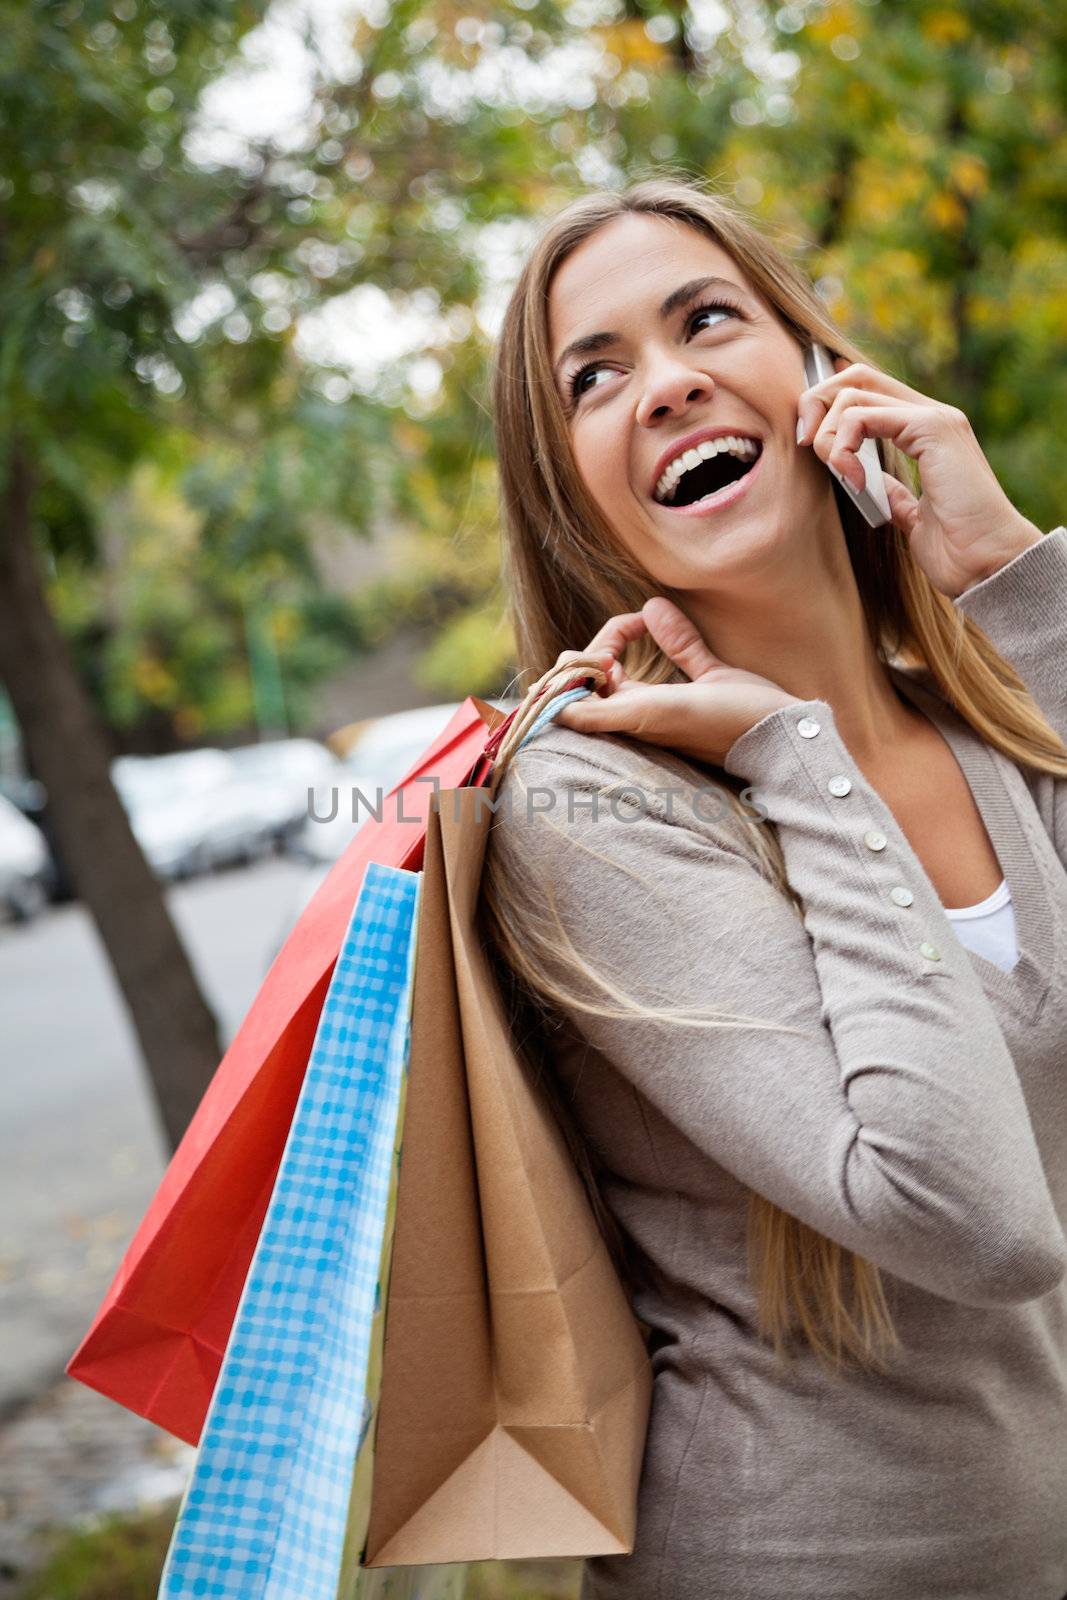 Woman On A Call While Carrying Shopping Bags by leaf